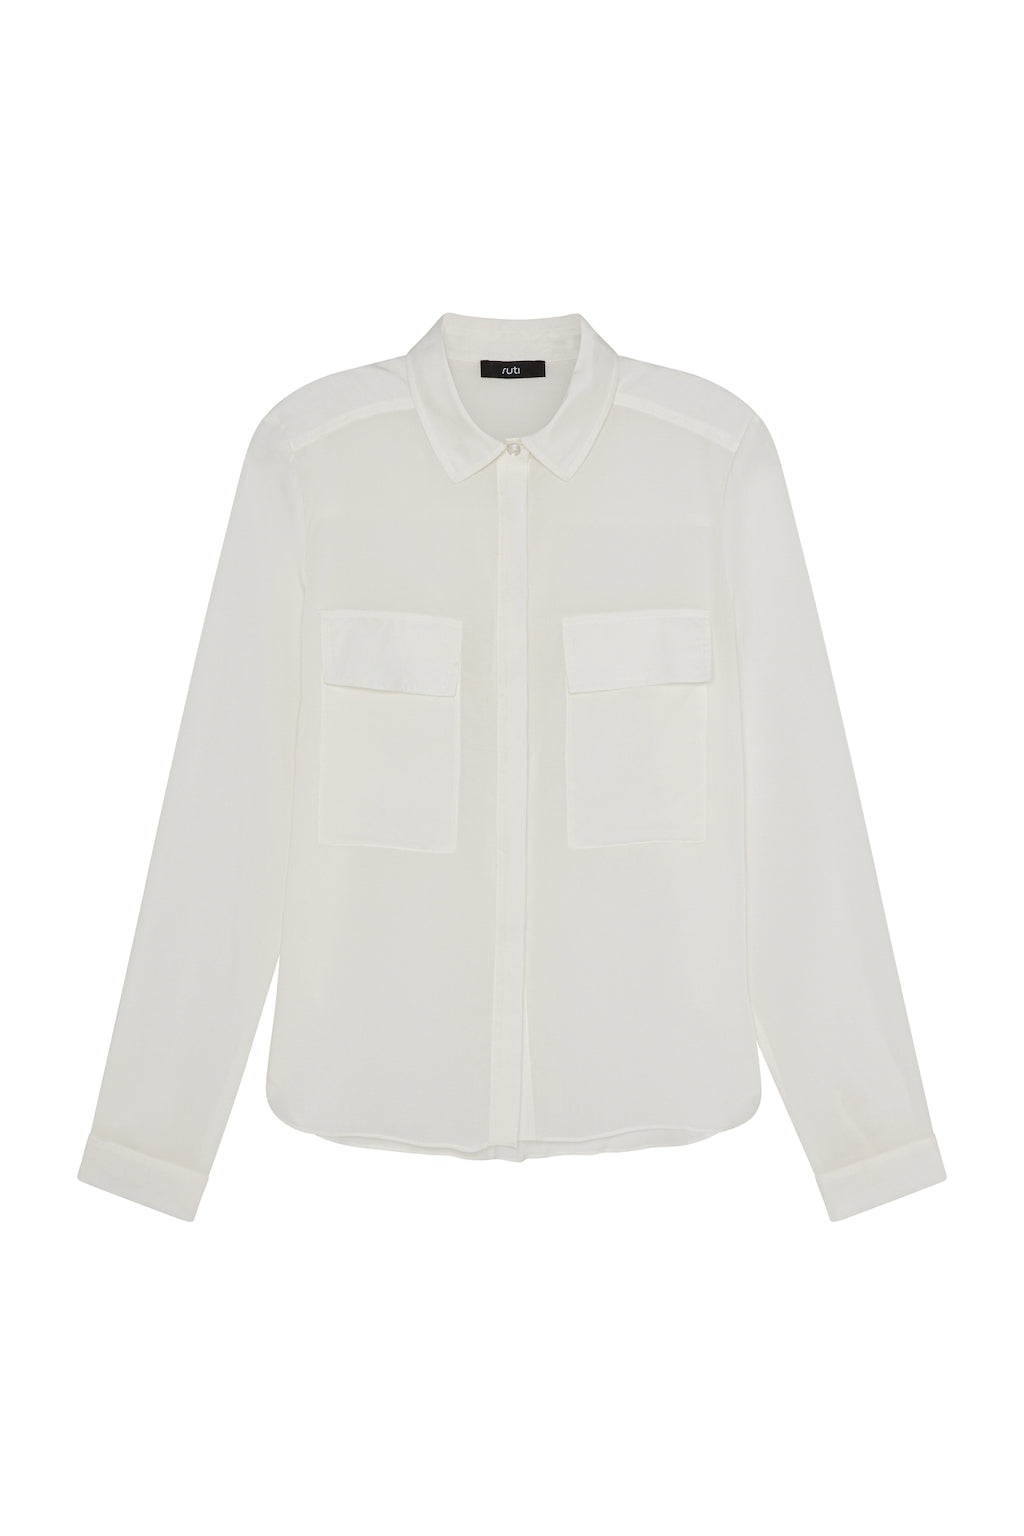 The Classic White Blouse